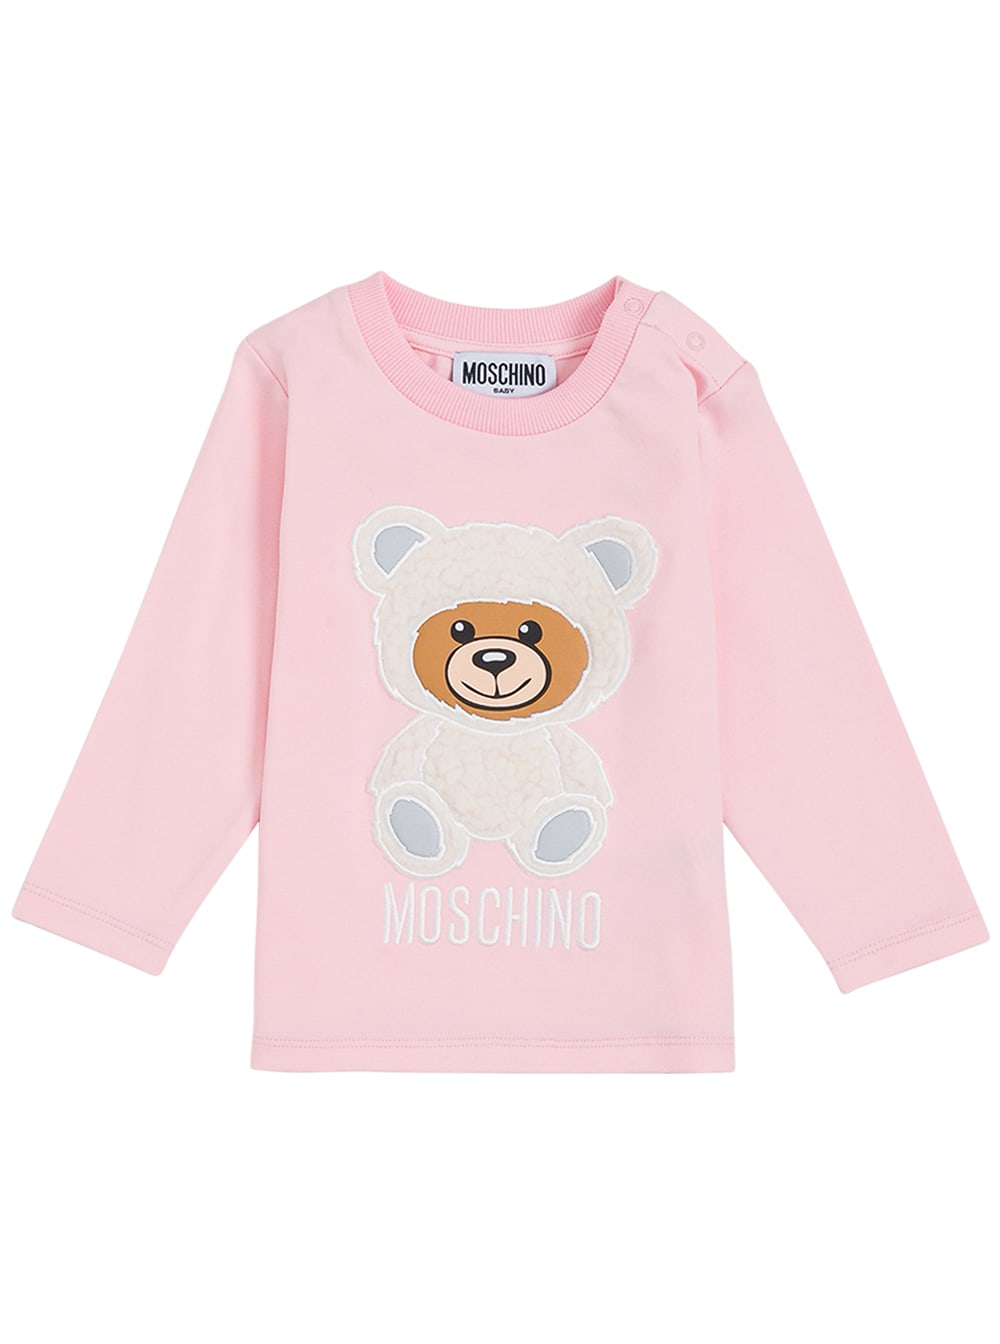 Moschino Long-sleeved Pink Cotton T-shirt With Teddy Bear Print